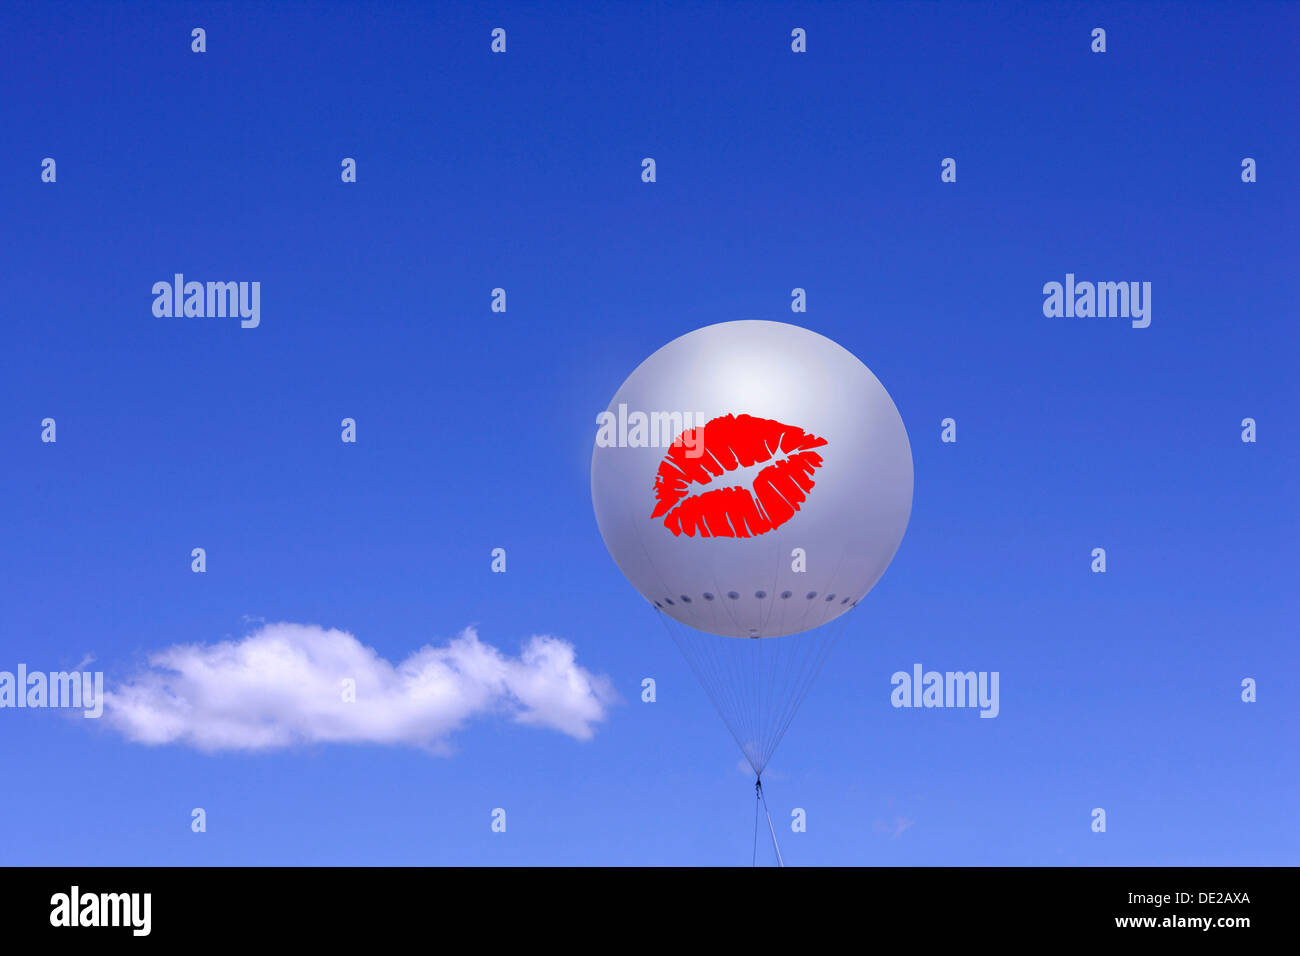 White balloon with printed red lips against a blue sky and a cloud, illustration, Germany Stock Photo